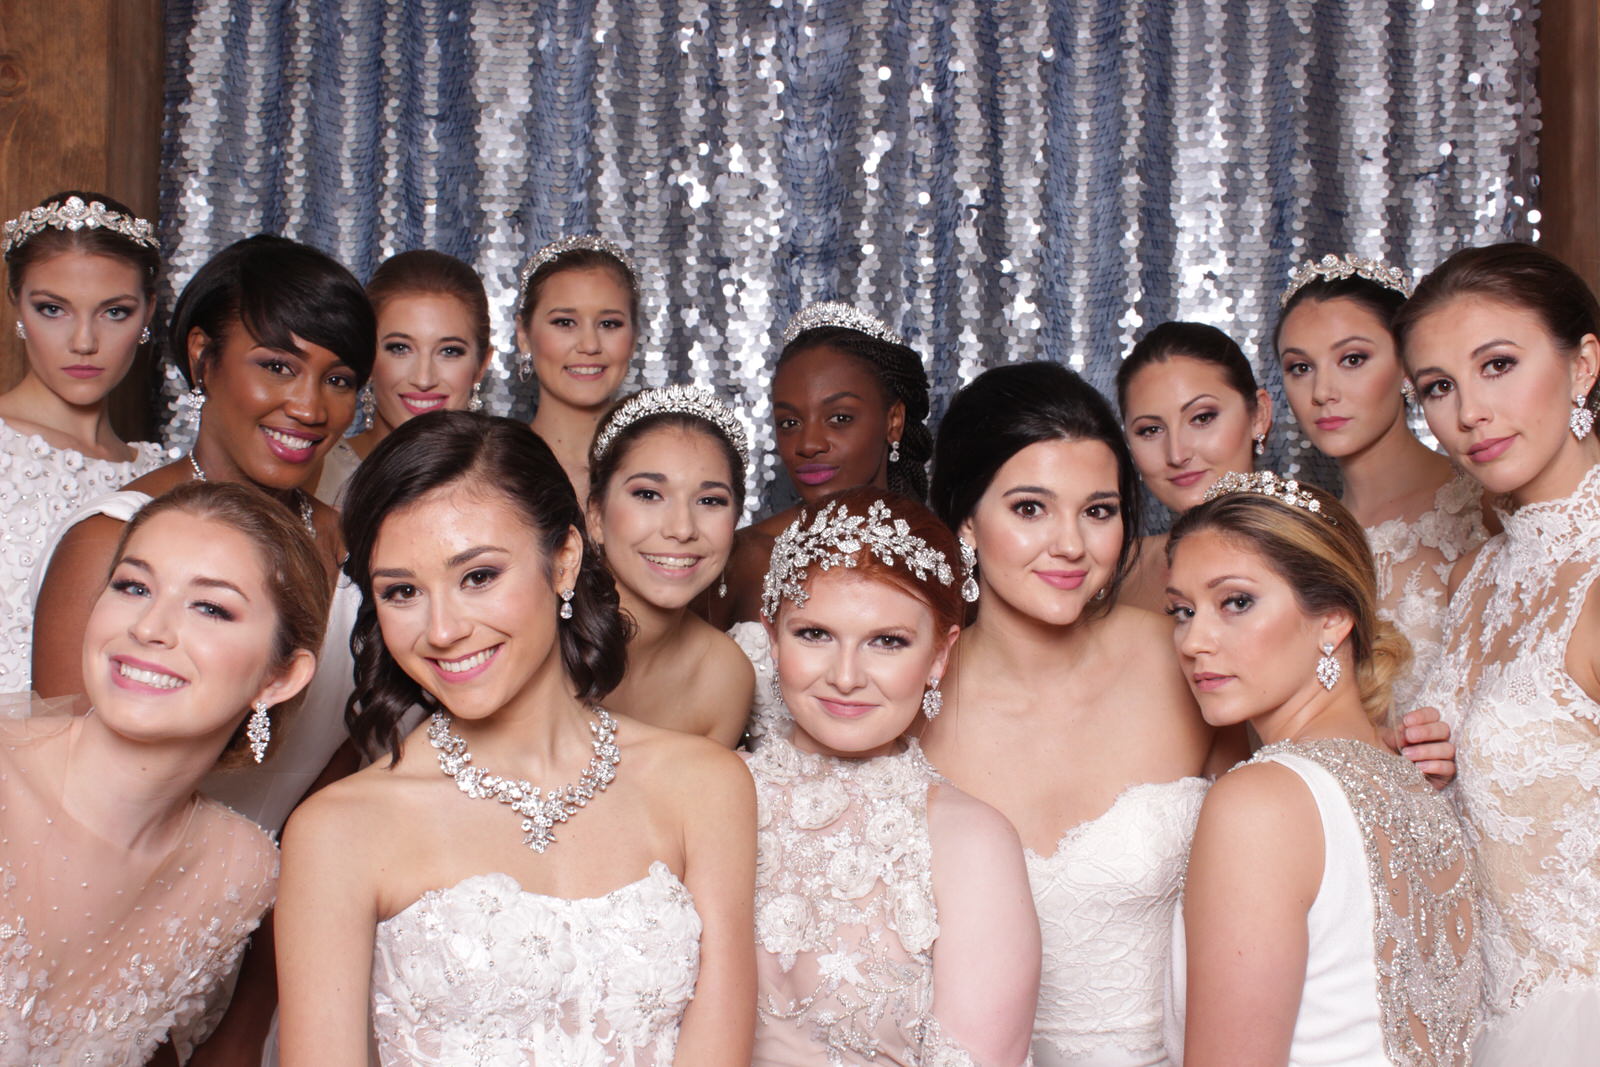 Lafayette,LA - Photo Booth - 5 Reasons to Attend a Bridal Show